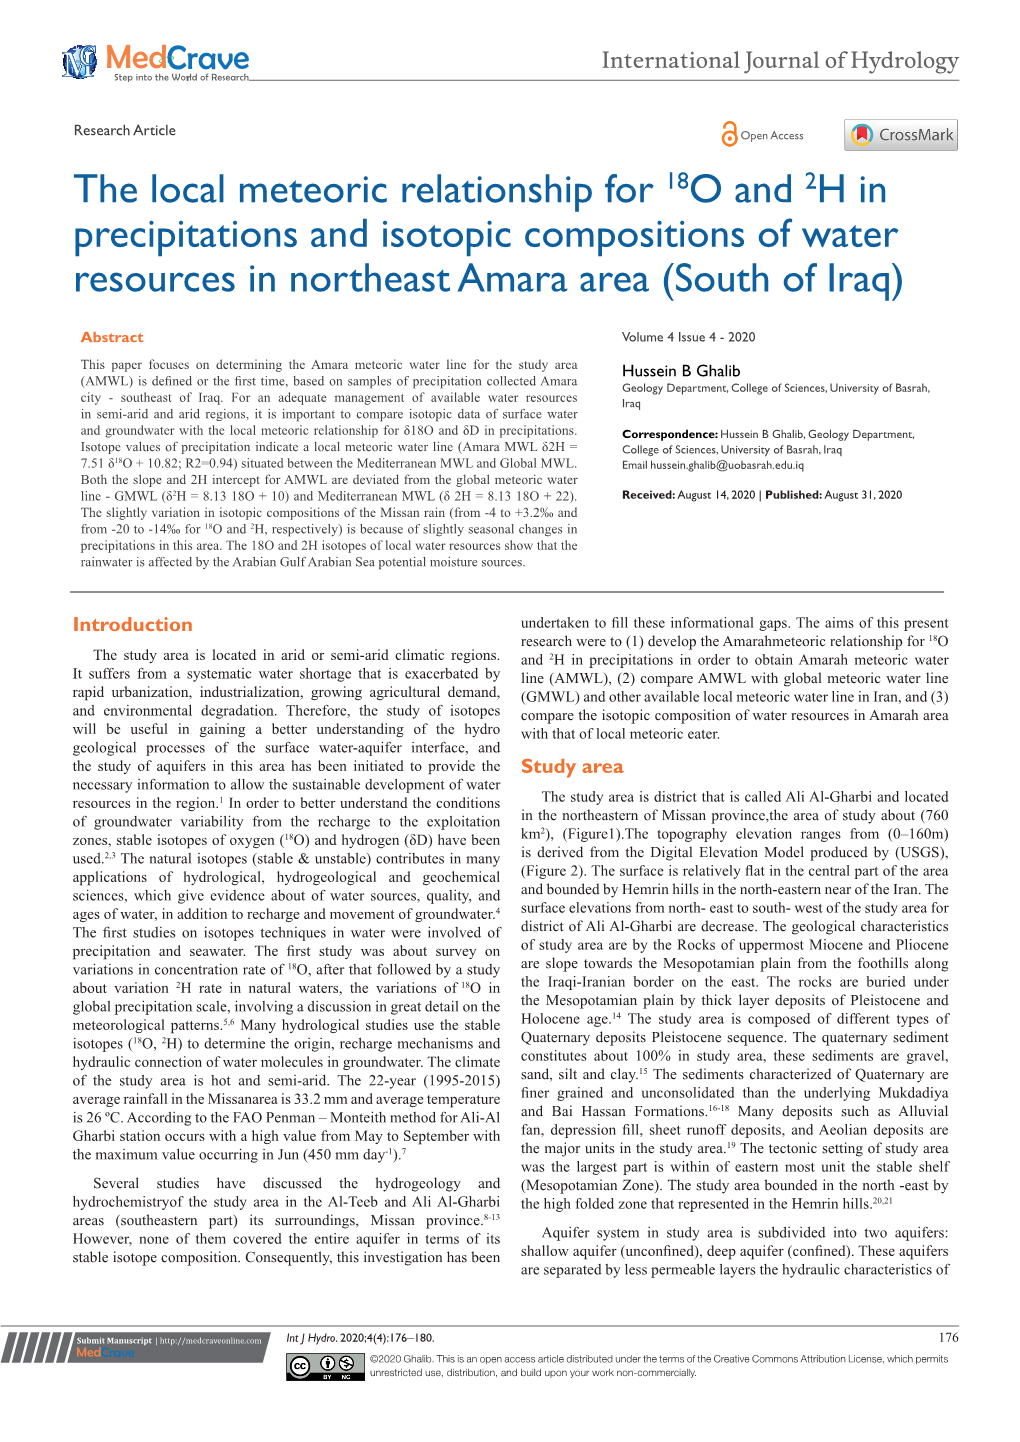 The Local Meteoric Relationship for 18O and 2H in Precipitations and Isotopic Compositions of Water Resources in Northeast Amara Area (South of Iraq)